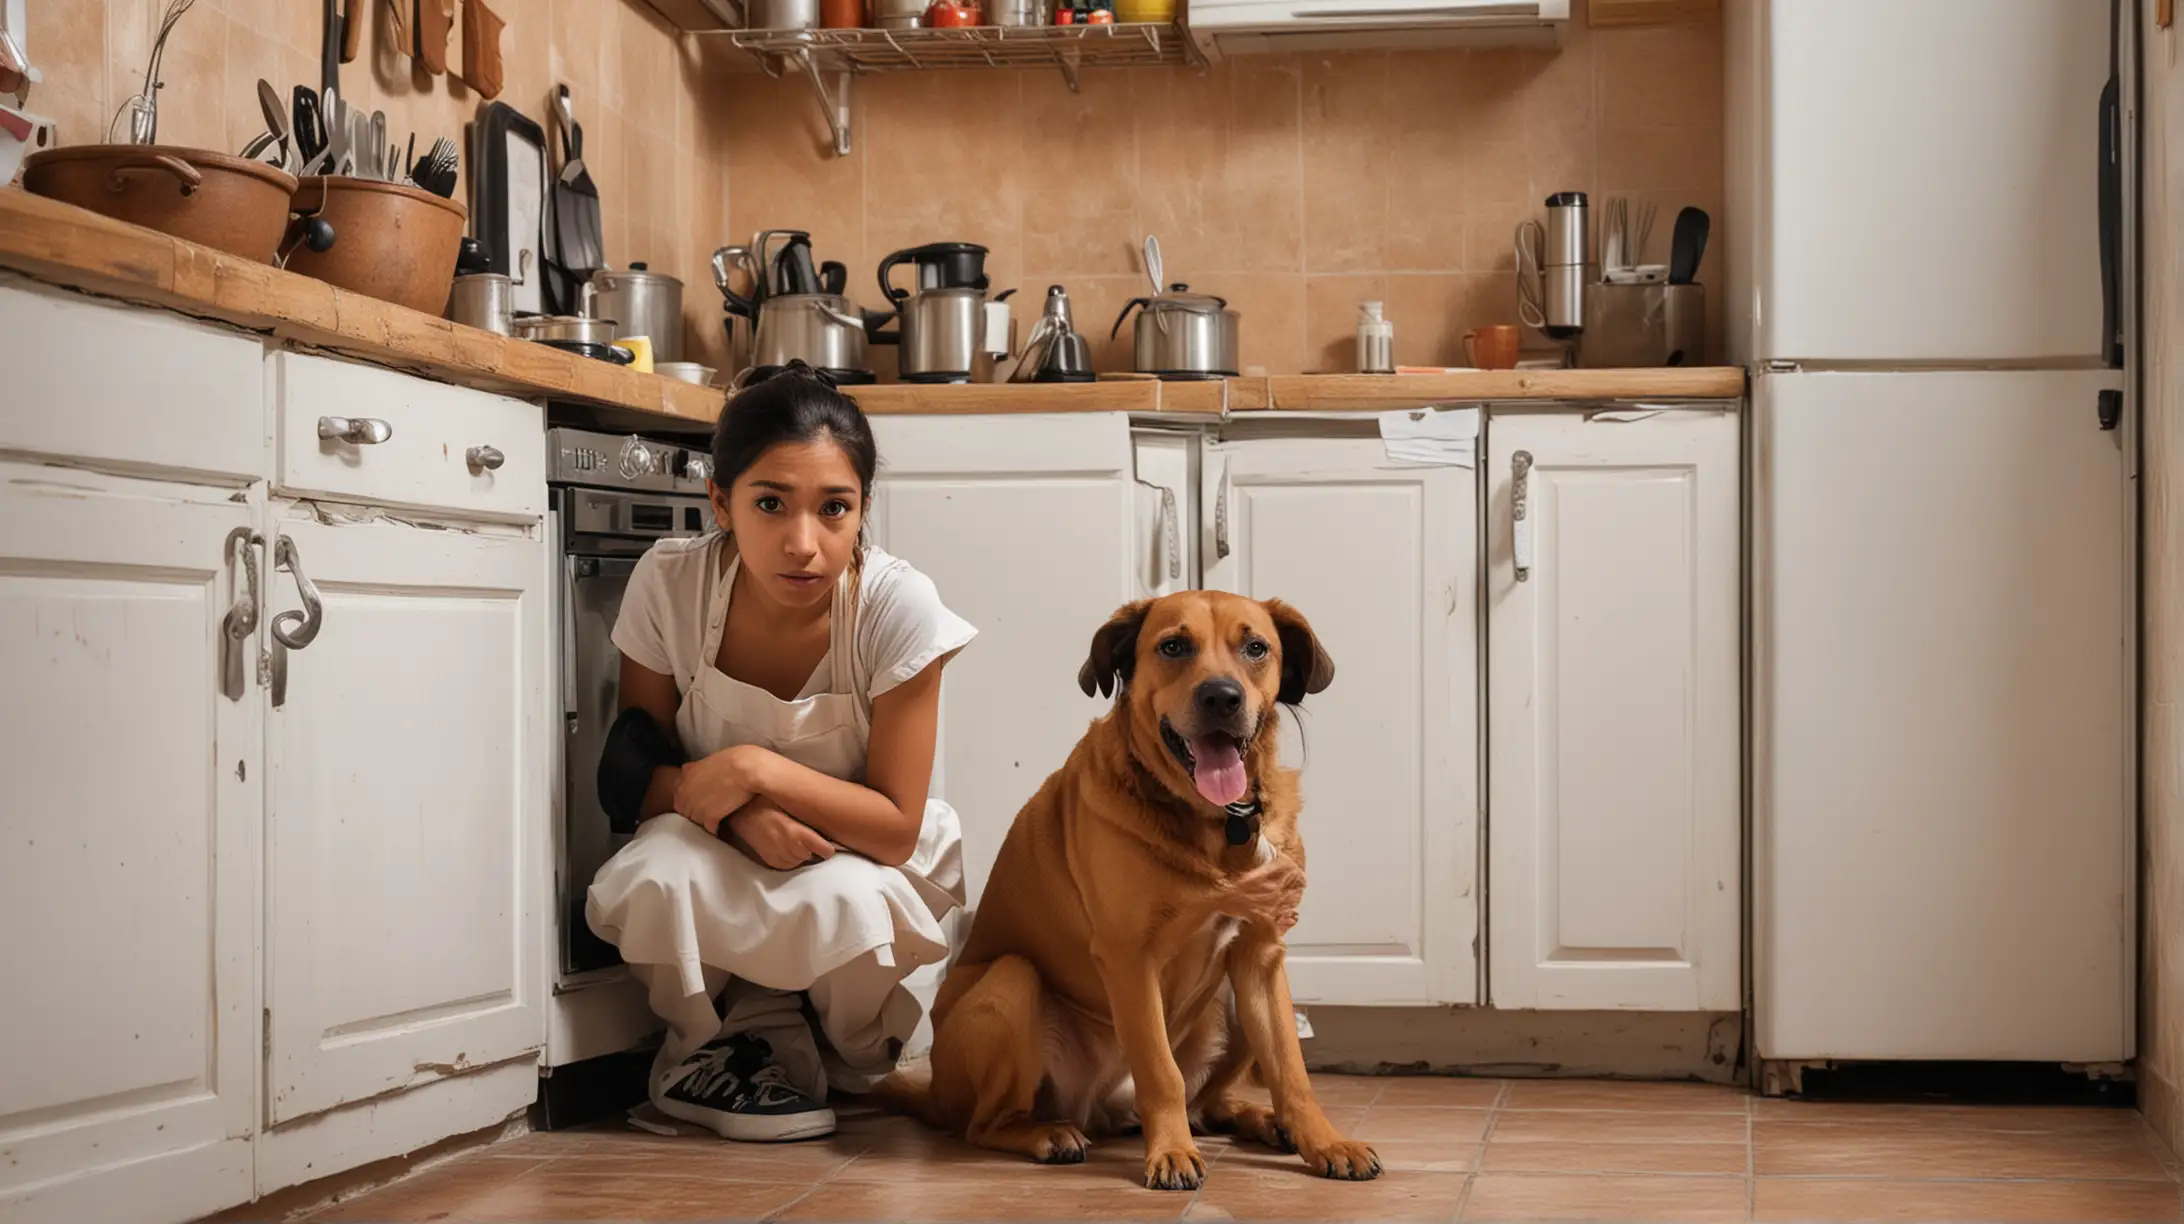 Mexican Housekeeper Hiding in Kitchen with Dog